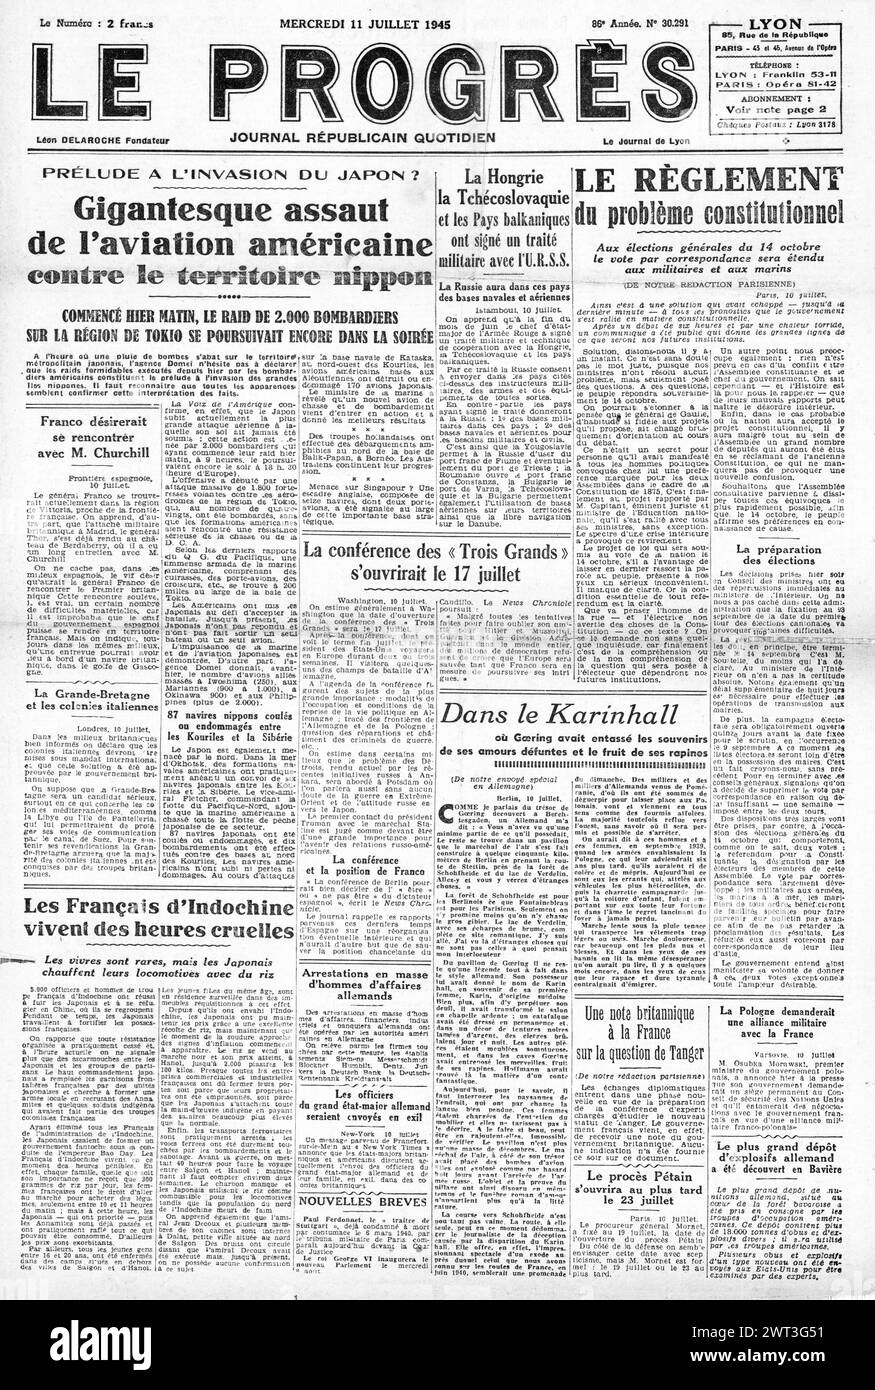 1945 Le Progres front page reporting Huge bombing raids on Japan Stock Photo